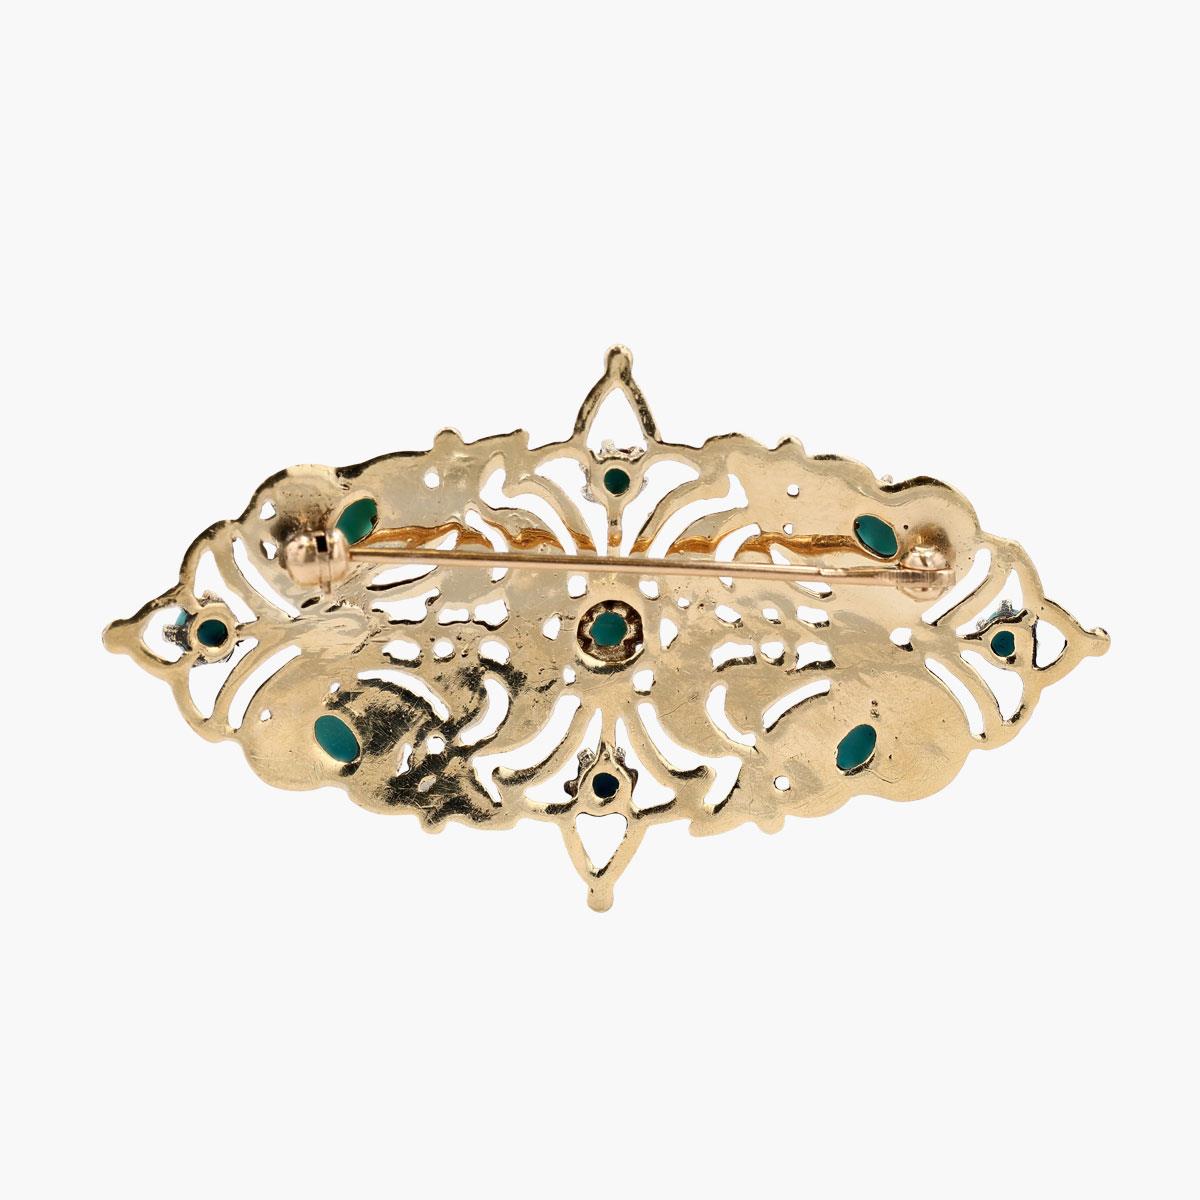 Vintage 14K Yg Brooch With Turquoise Beads